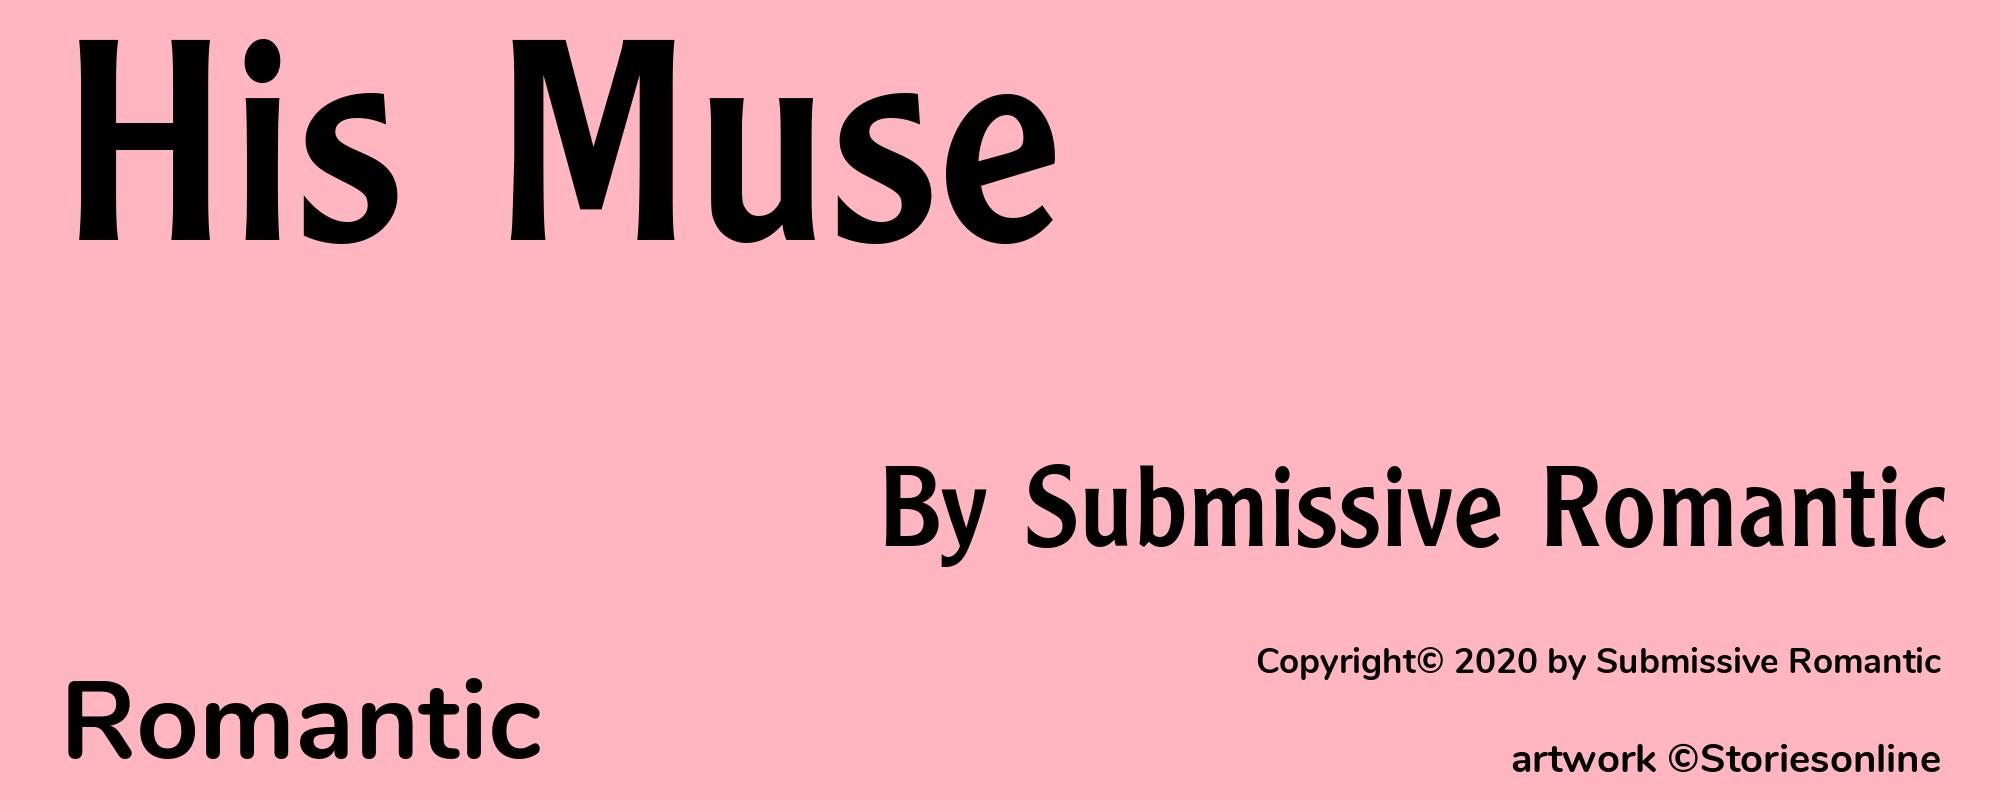 His Muse - Cover